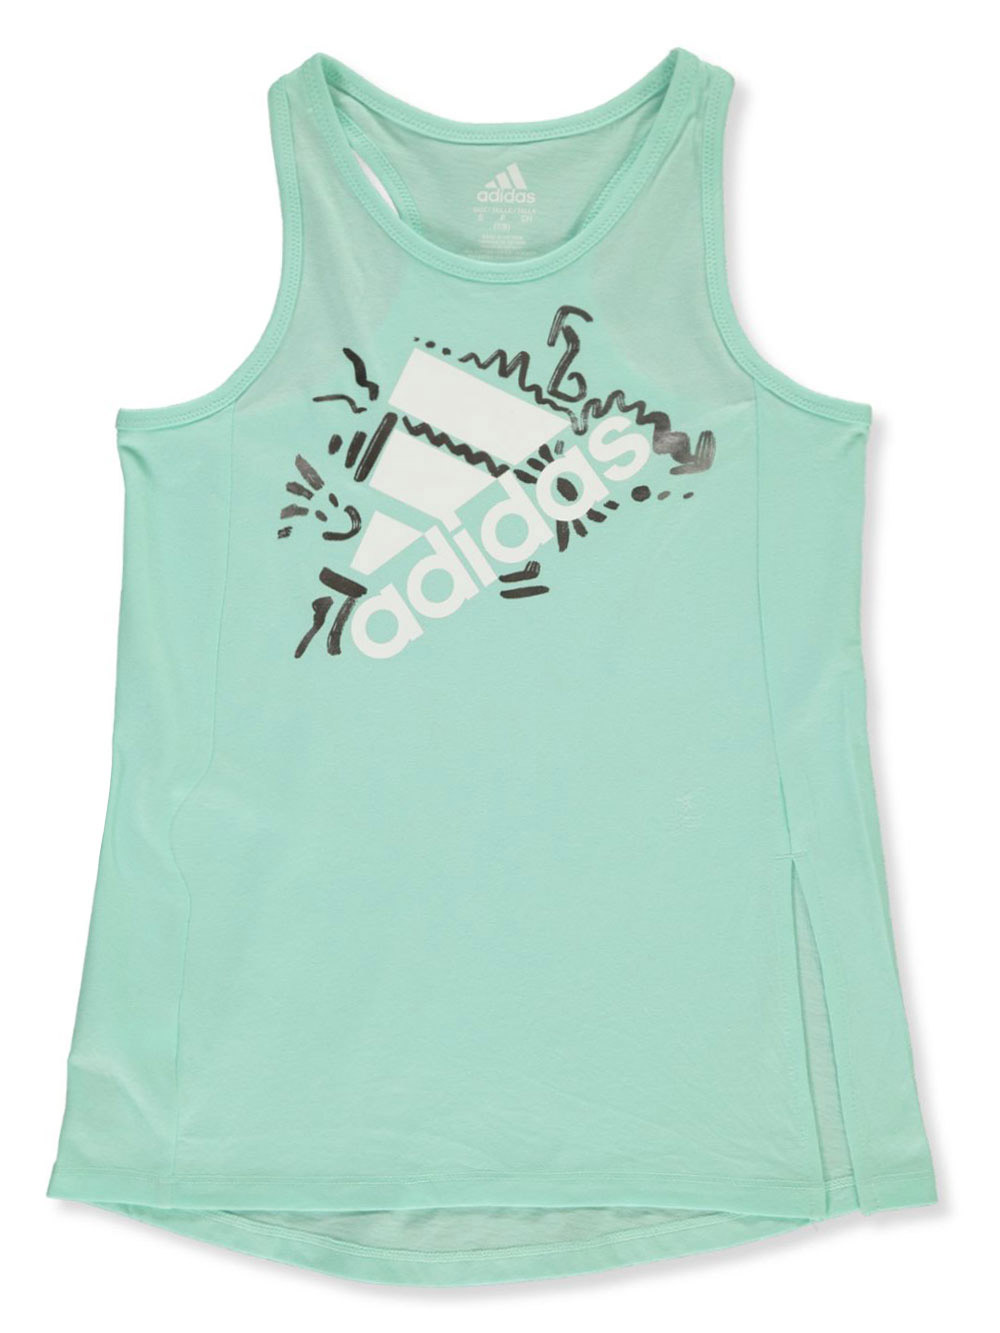 Size 12 Tank Tops for Girls